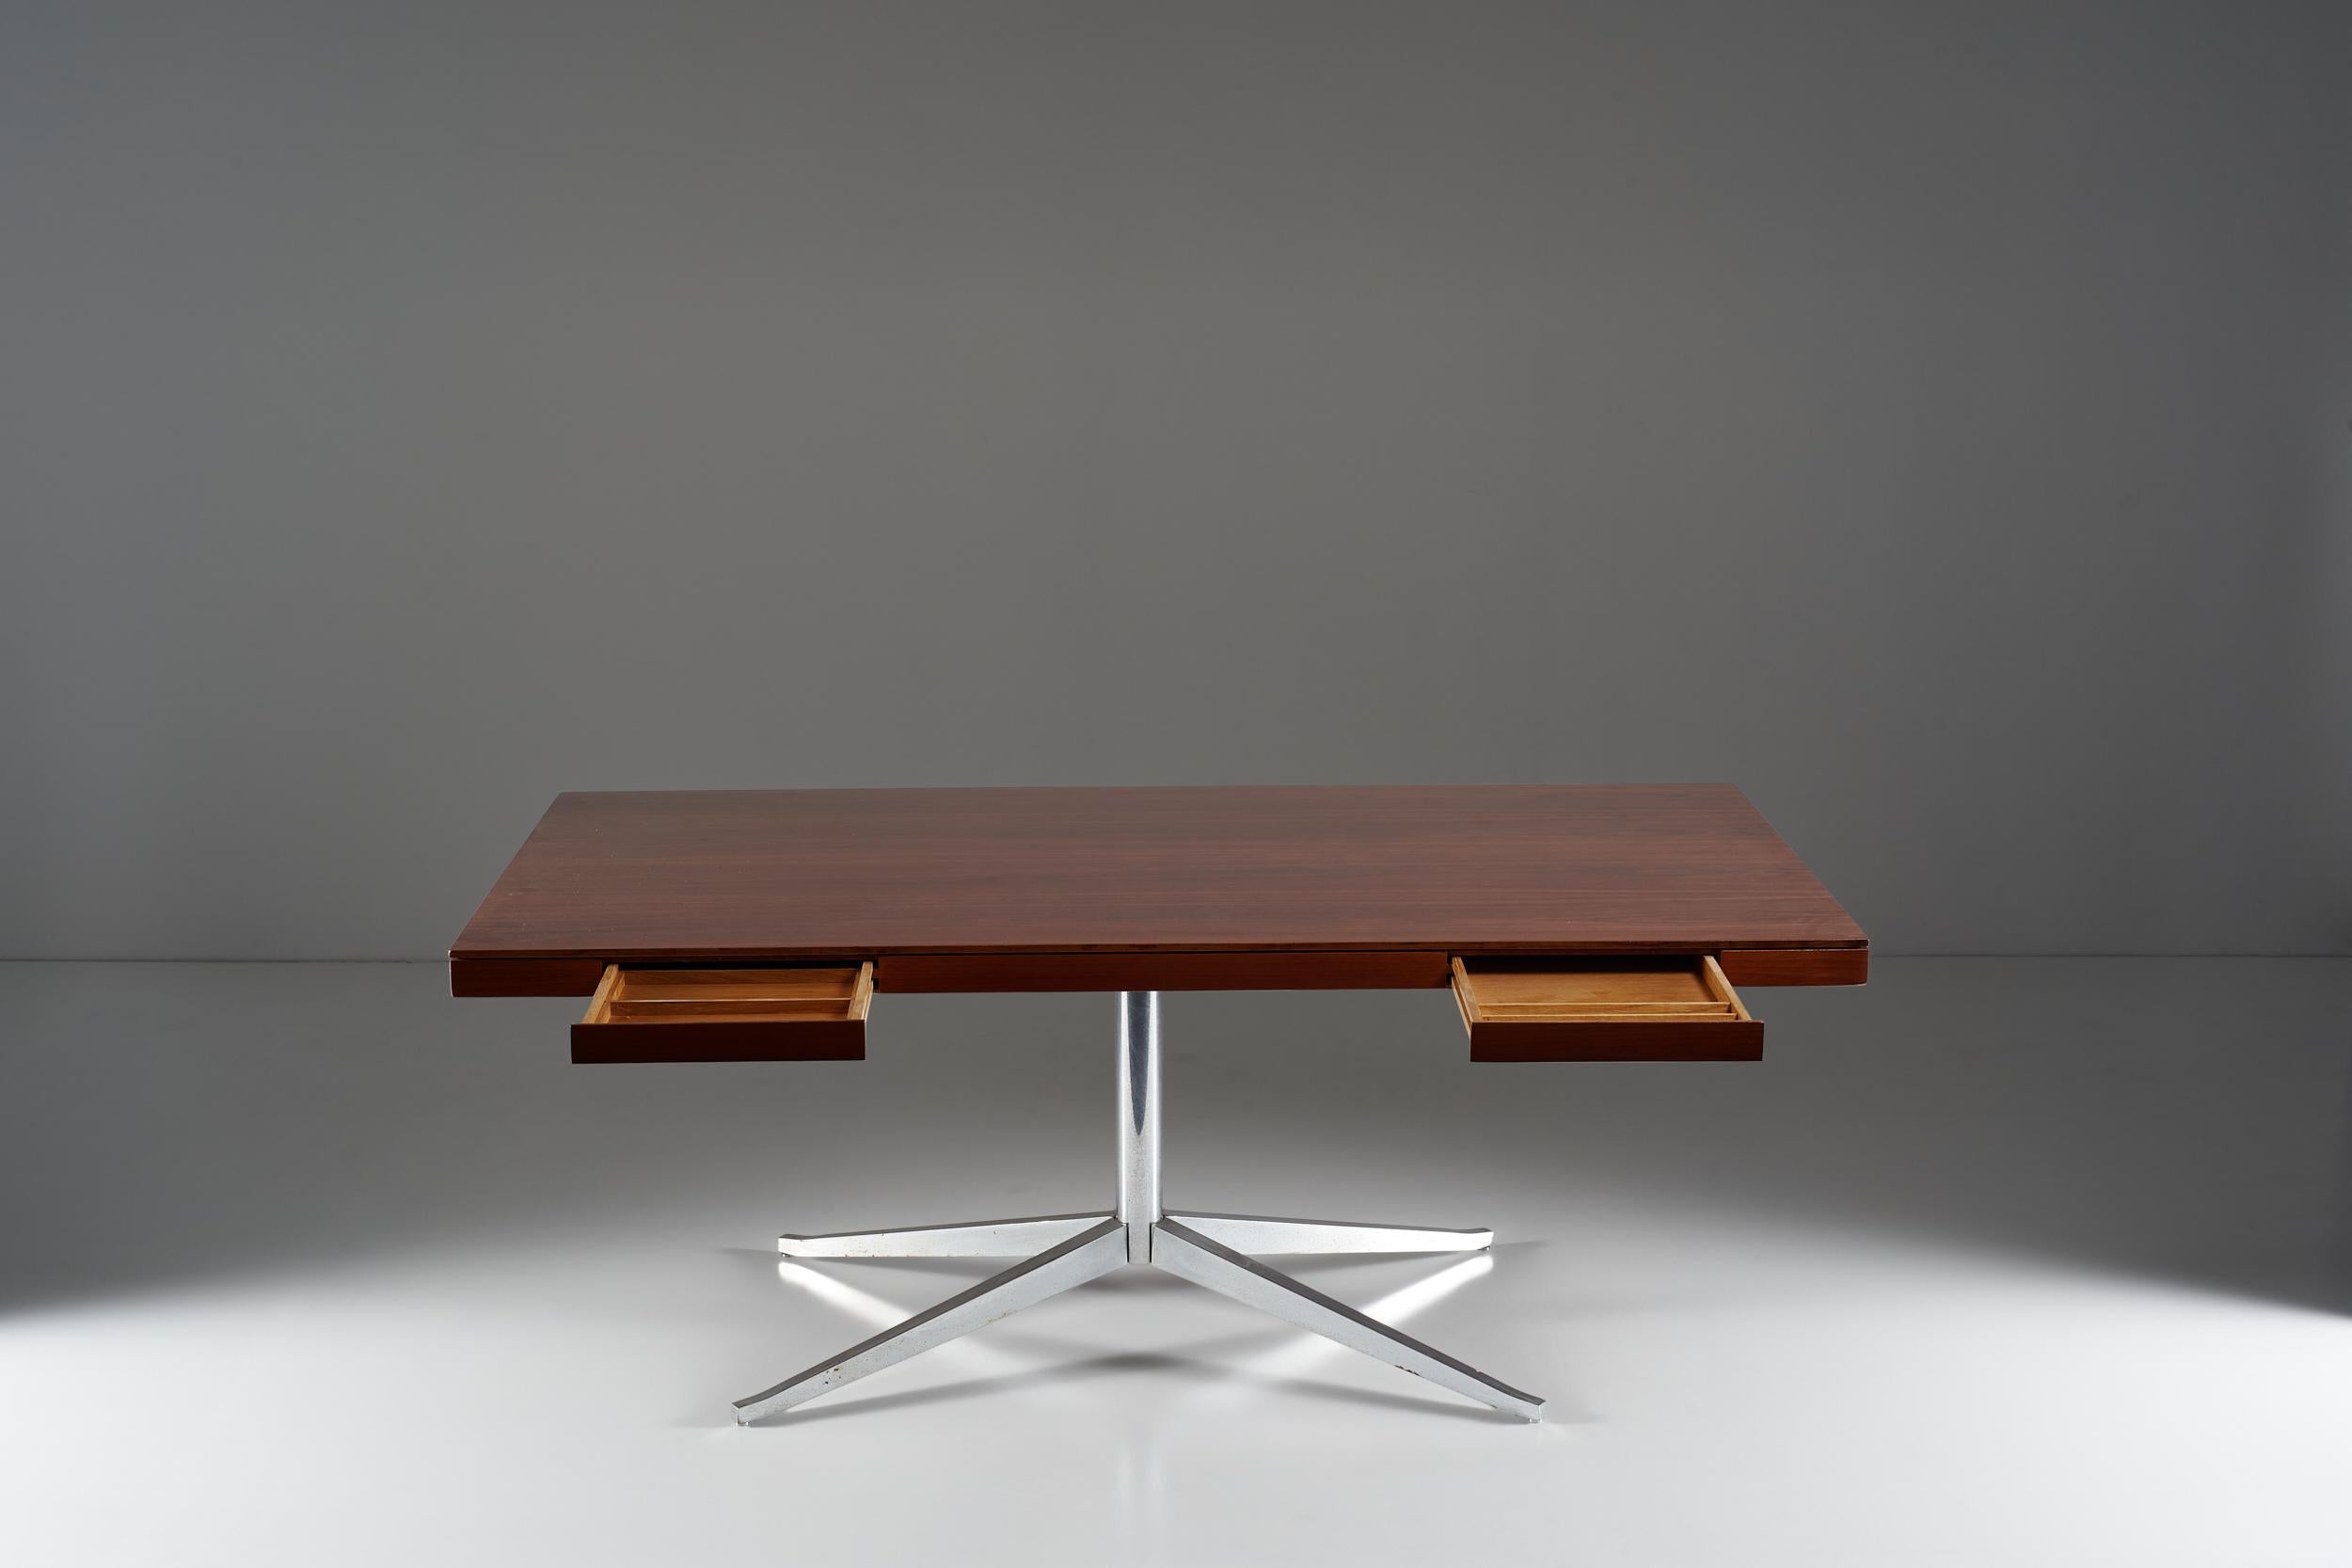 The Knoll table is composed following alternate chromatic elements. The chrome-plated steel that forms the support is shiny and airy, this allows the top to give importance to the wood that hides four drawers on both sides. The spatial dimension of